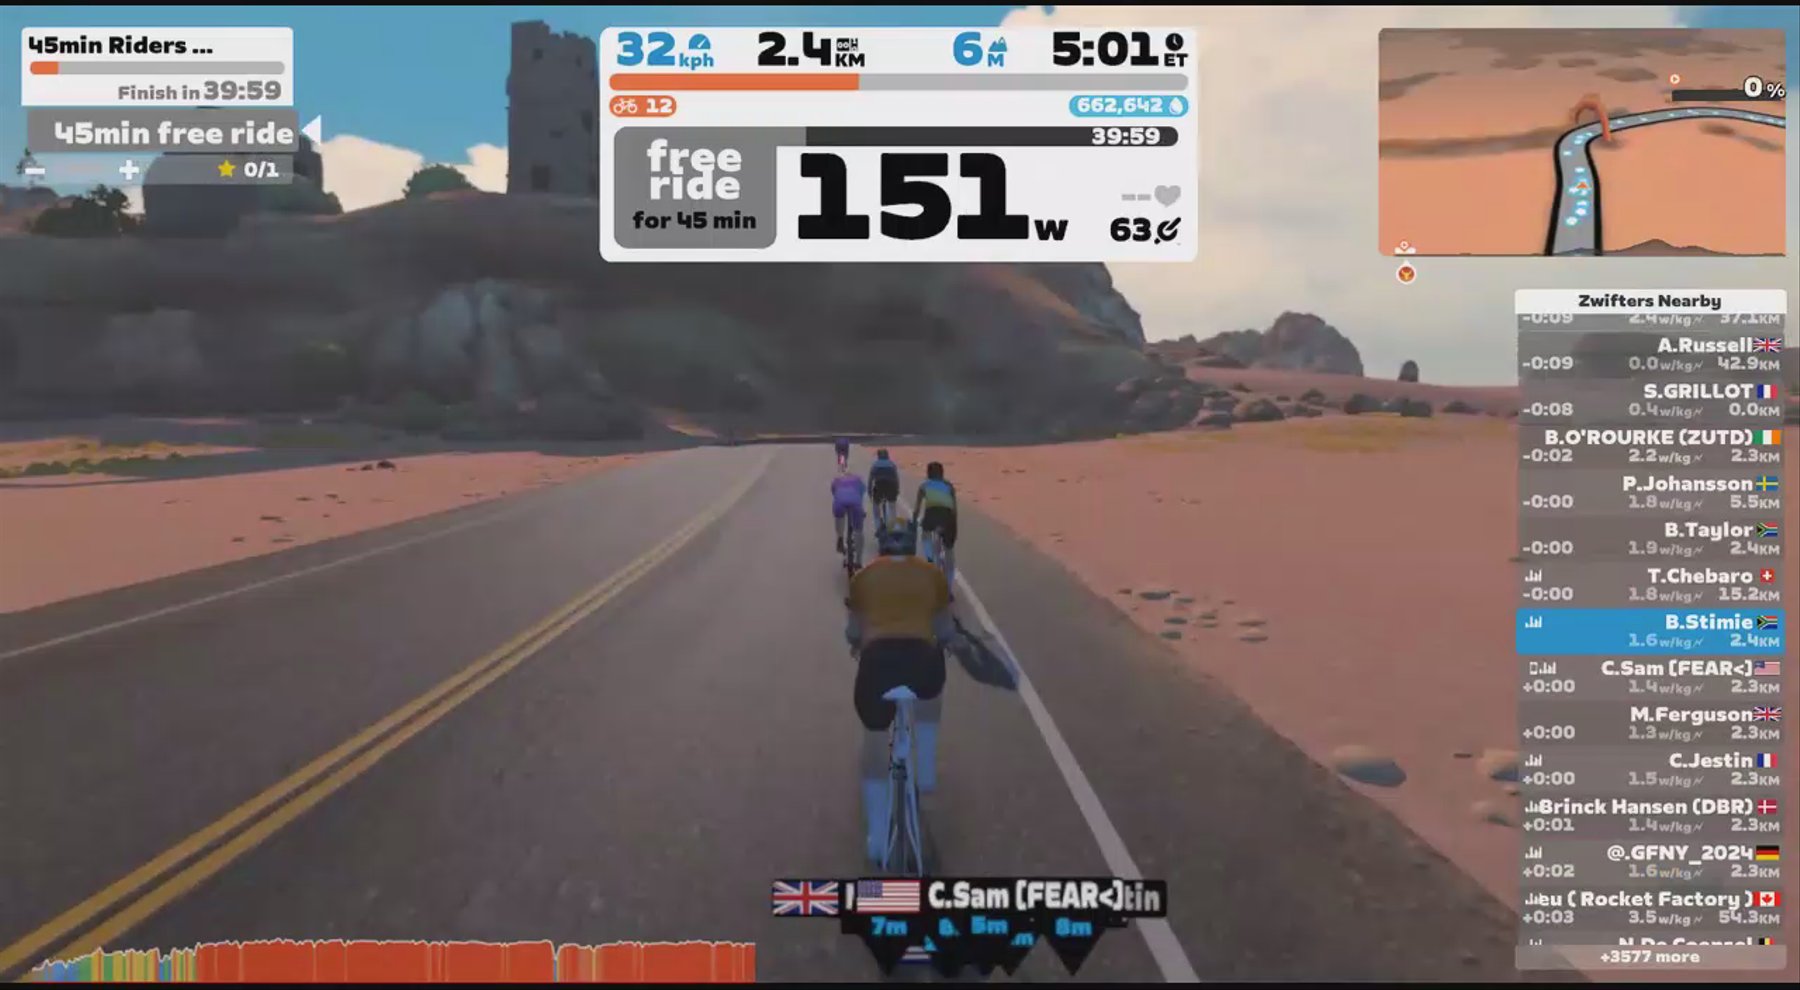 Zwift - 45min Riders Choice on Flat Route in Watopia